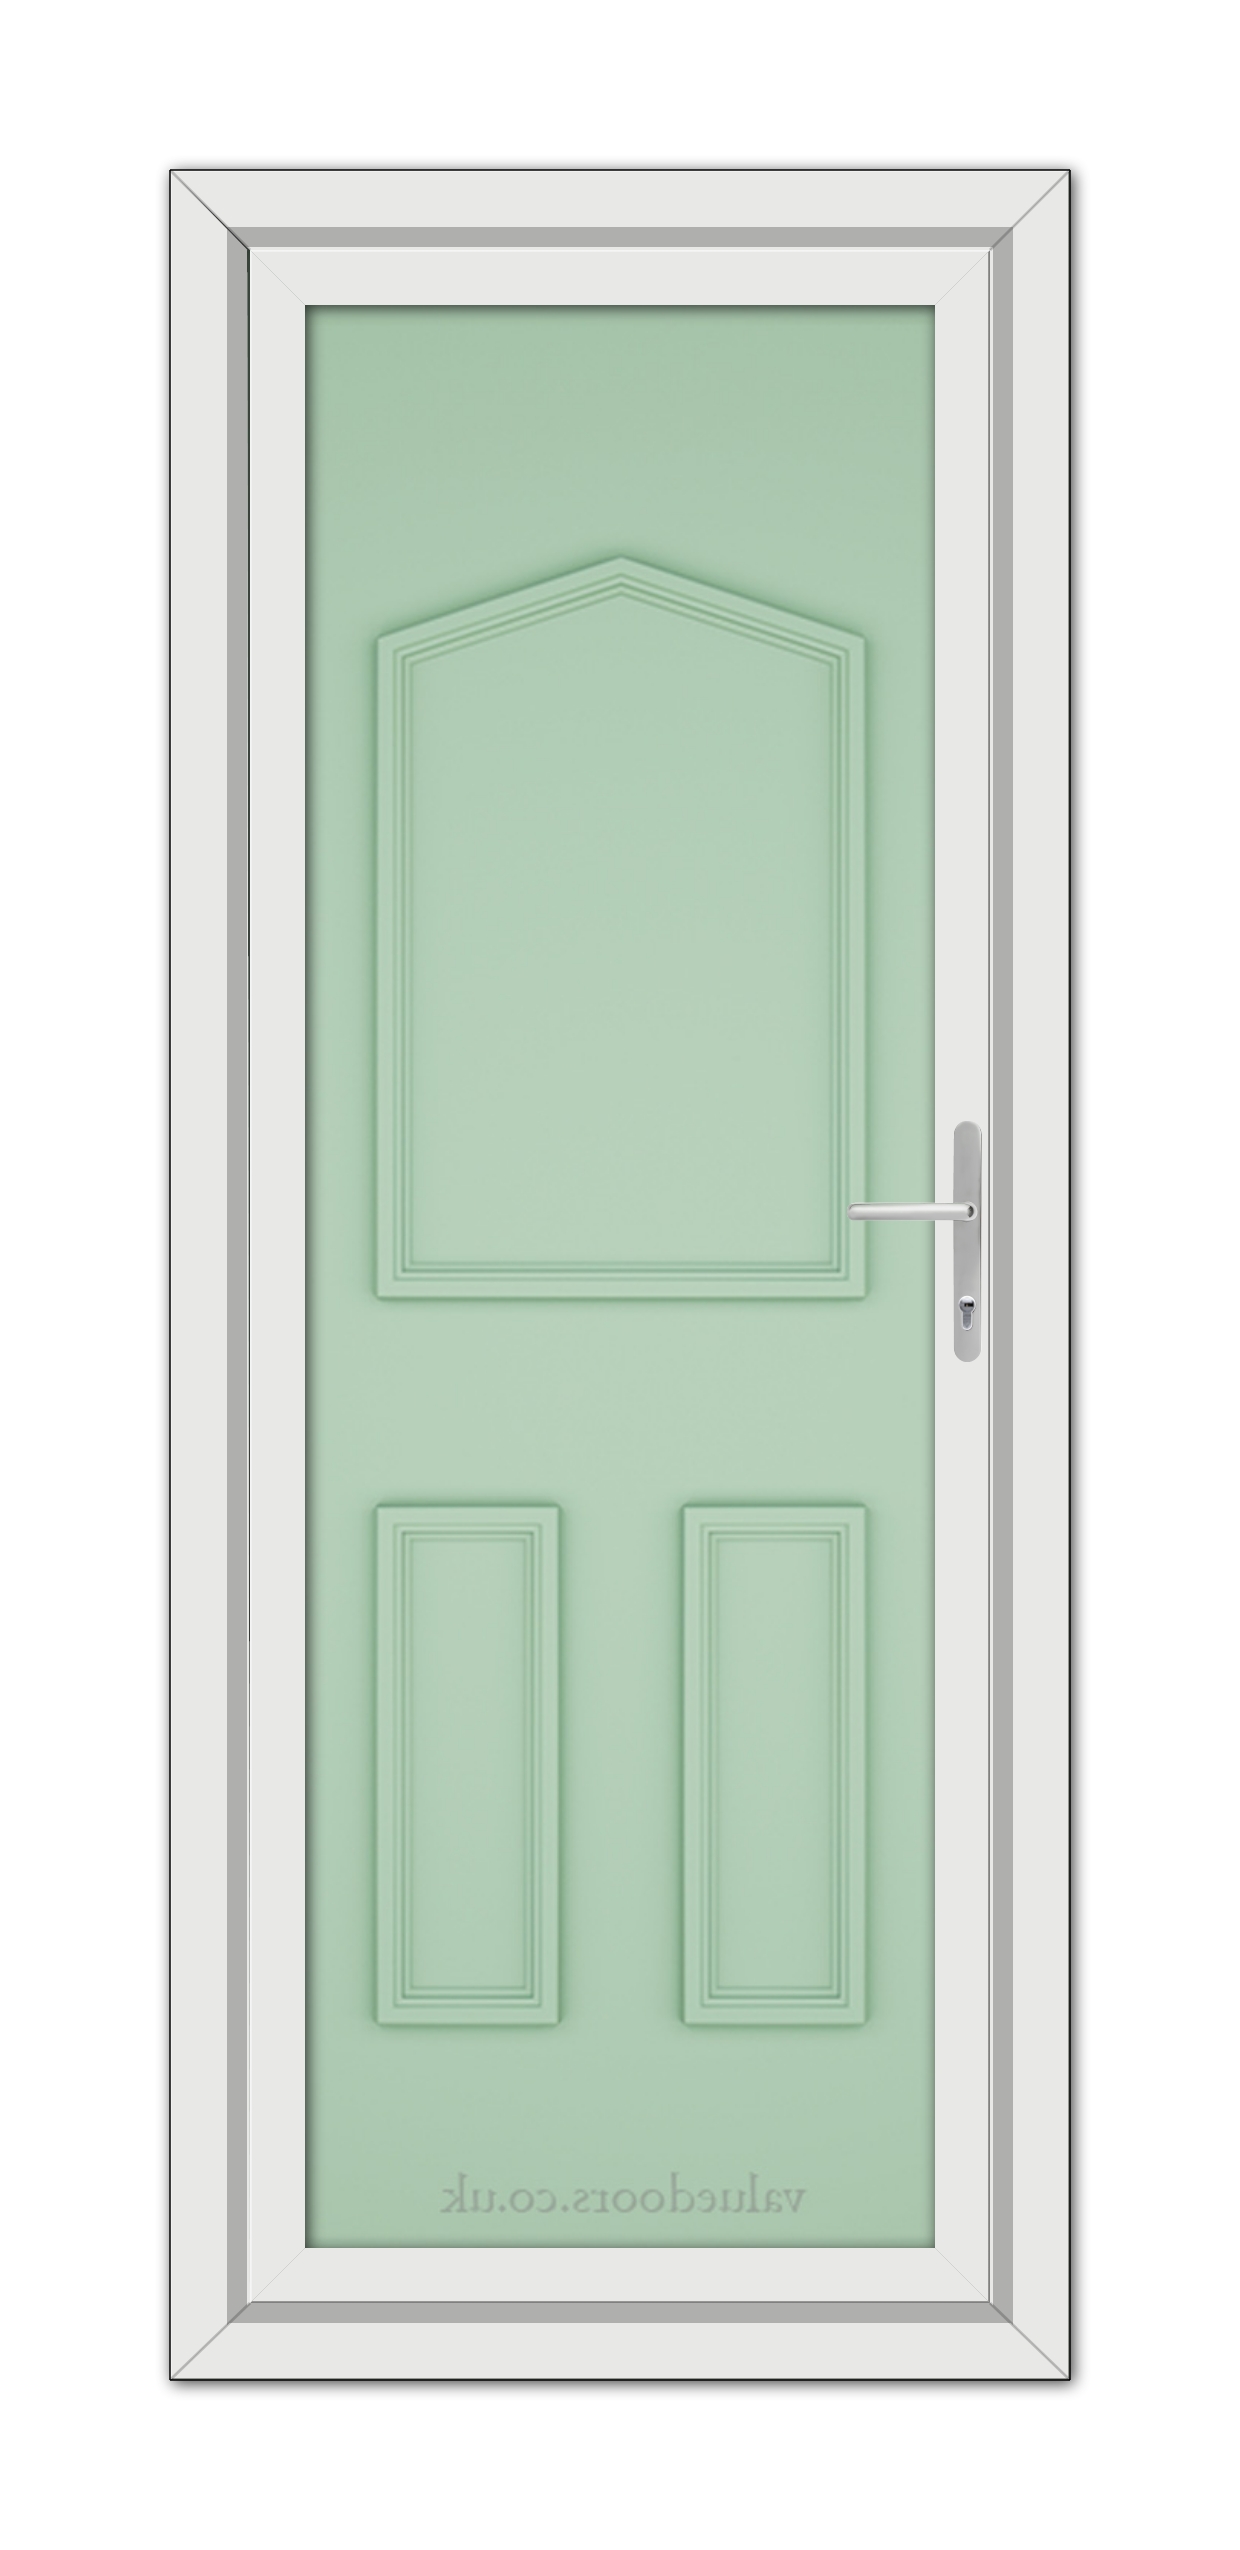 A close-up of a Chartwell Green Oxford Solid uPVC Door.